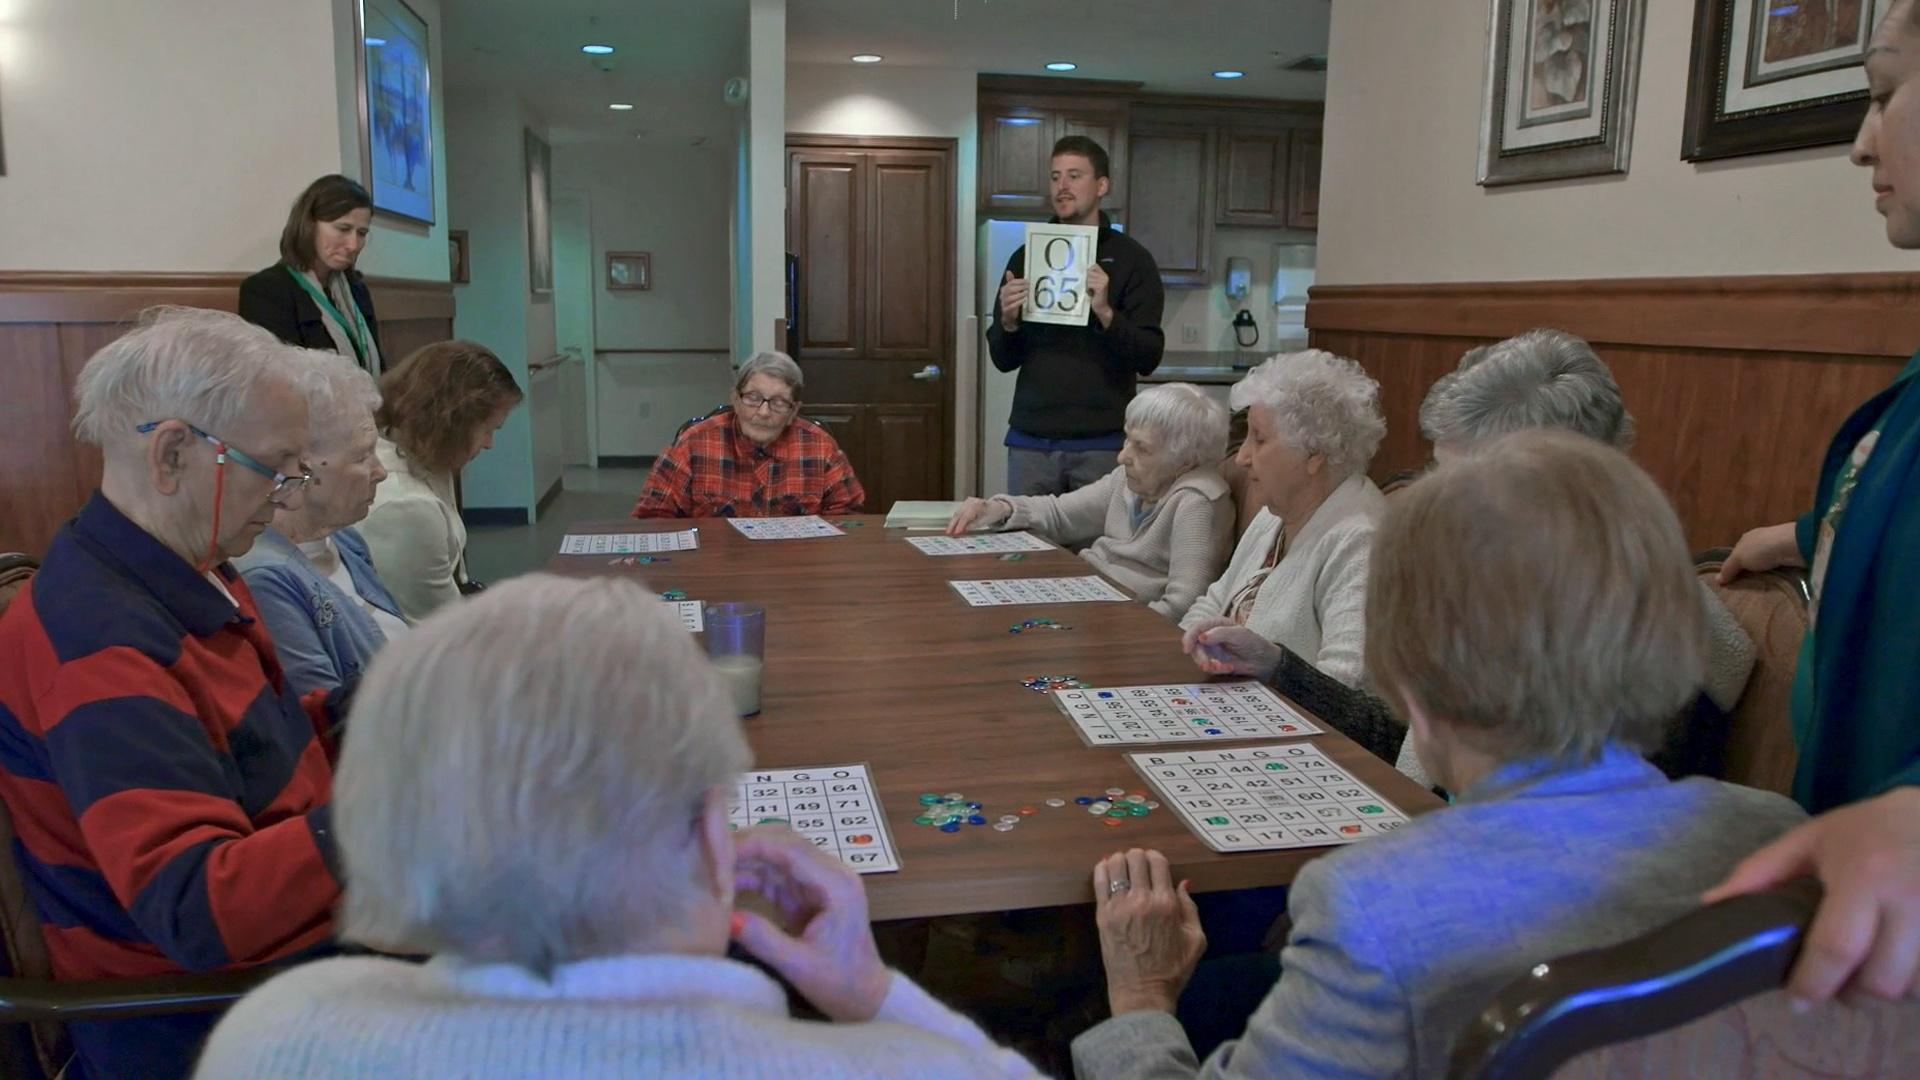 Mickey McGuinness tries his hand calling the numbers for Bingo at a retirement home.